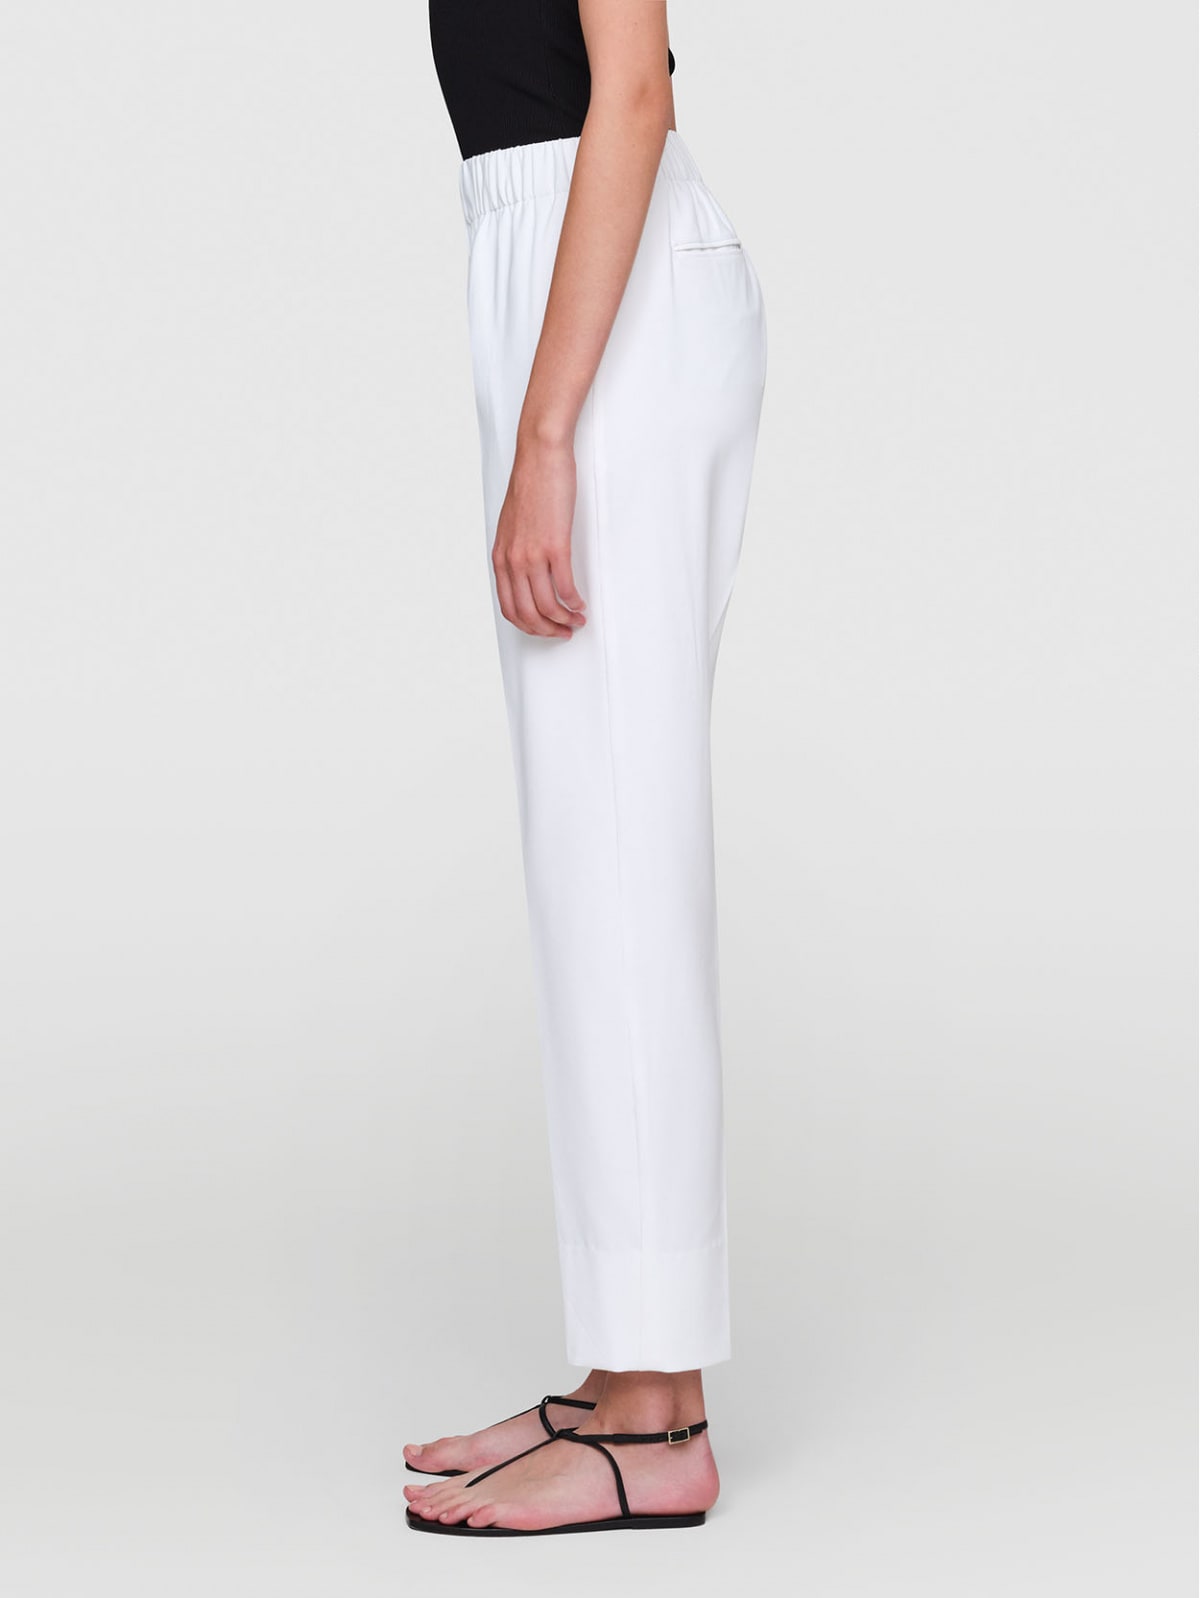 IN GOOD COMPANY - MARVIN Summer Suiting Pants White XS